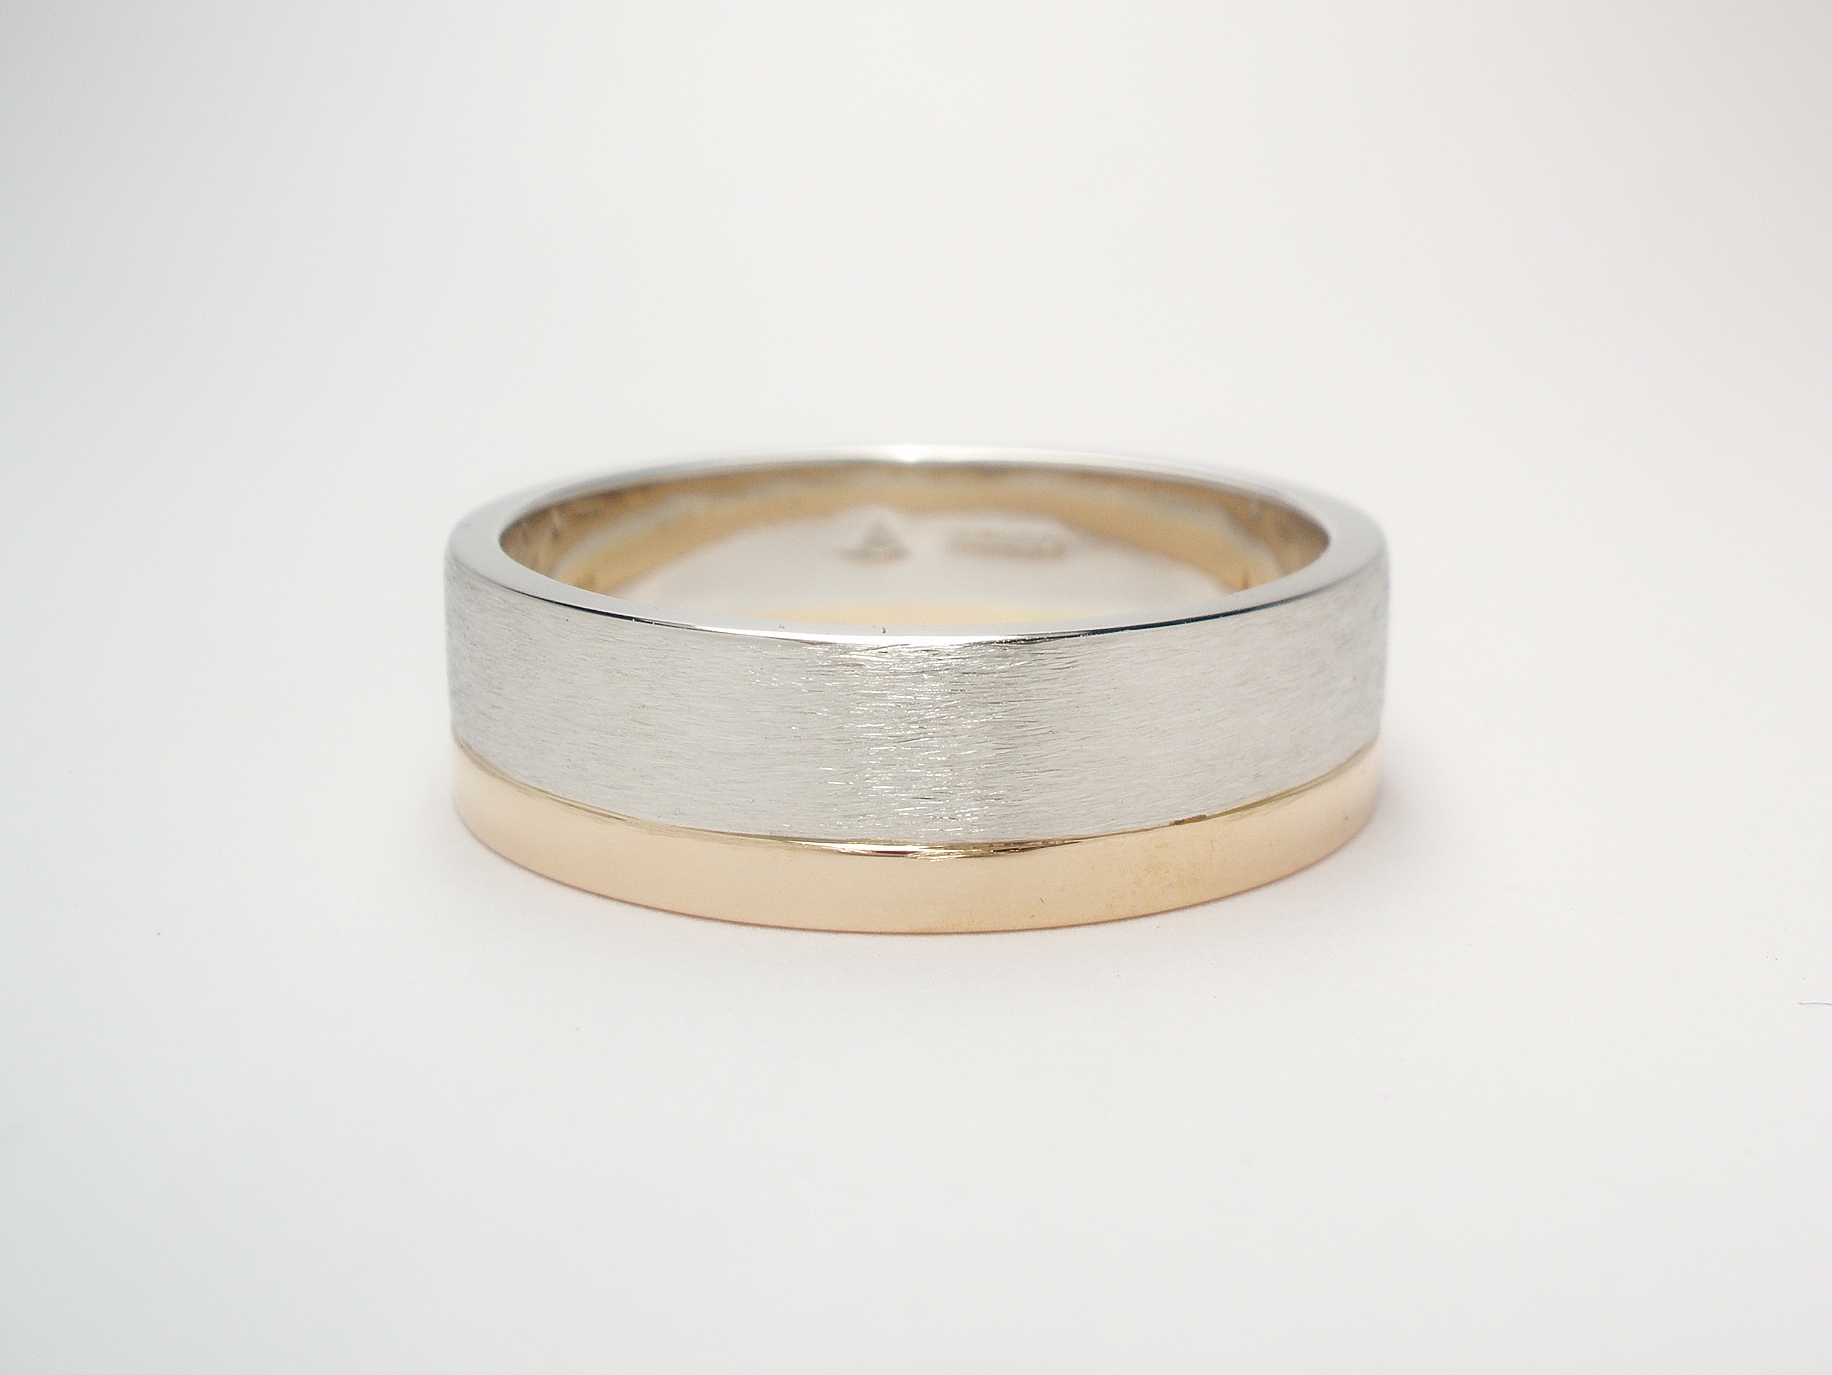 A 4.5mm broad platinum ring brushed finish with a 2mm broad red gold ring applied to one edge.